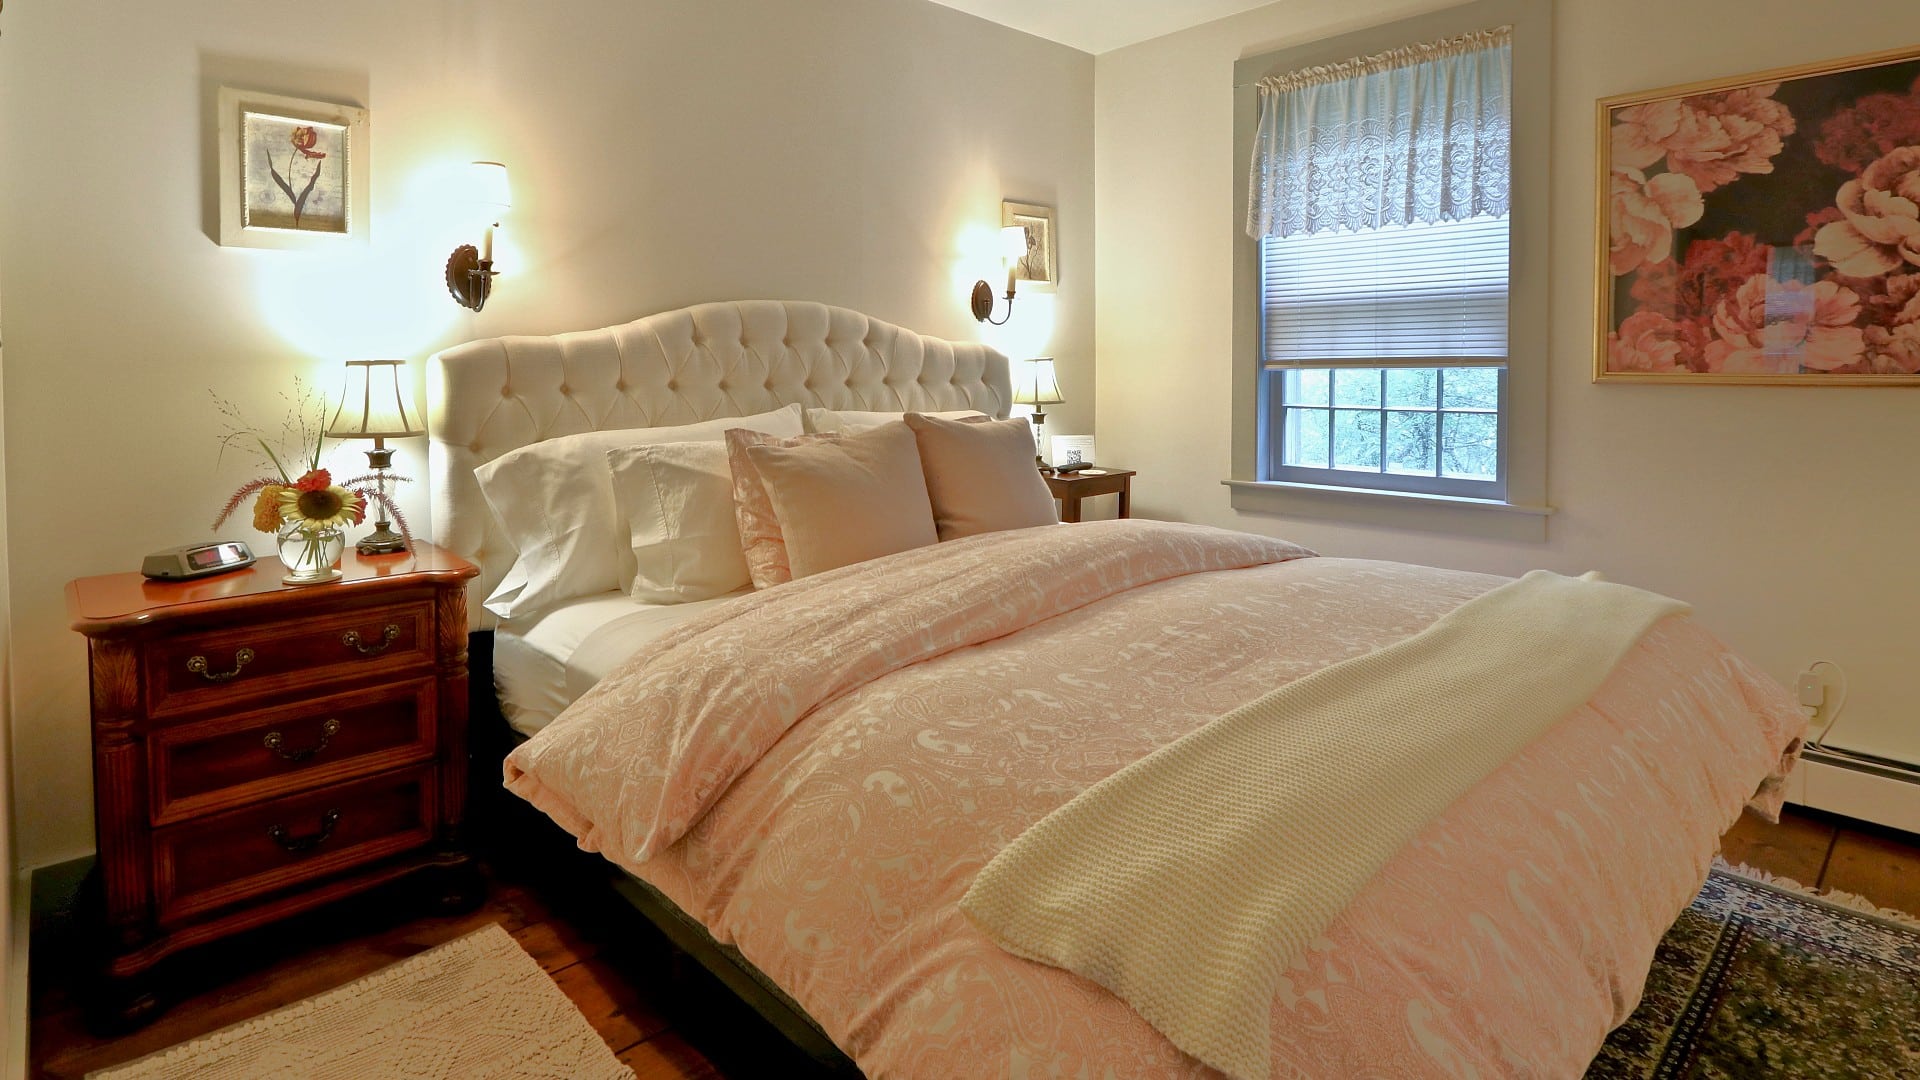 King bed with cream upholstered headboard in pretty bedroom with pink and floral accents